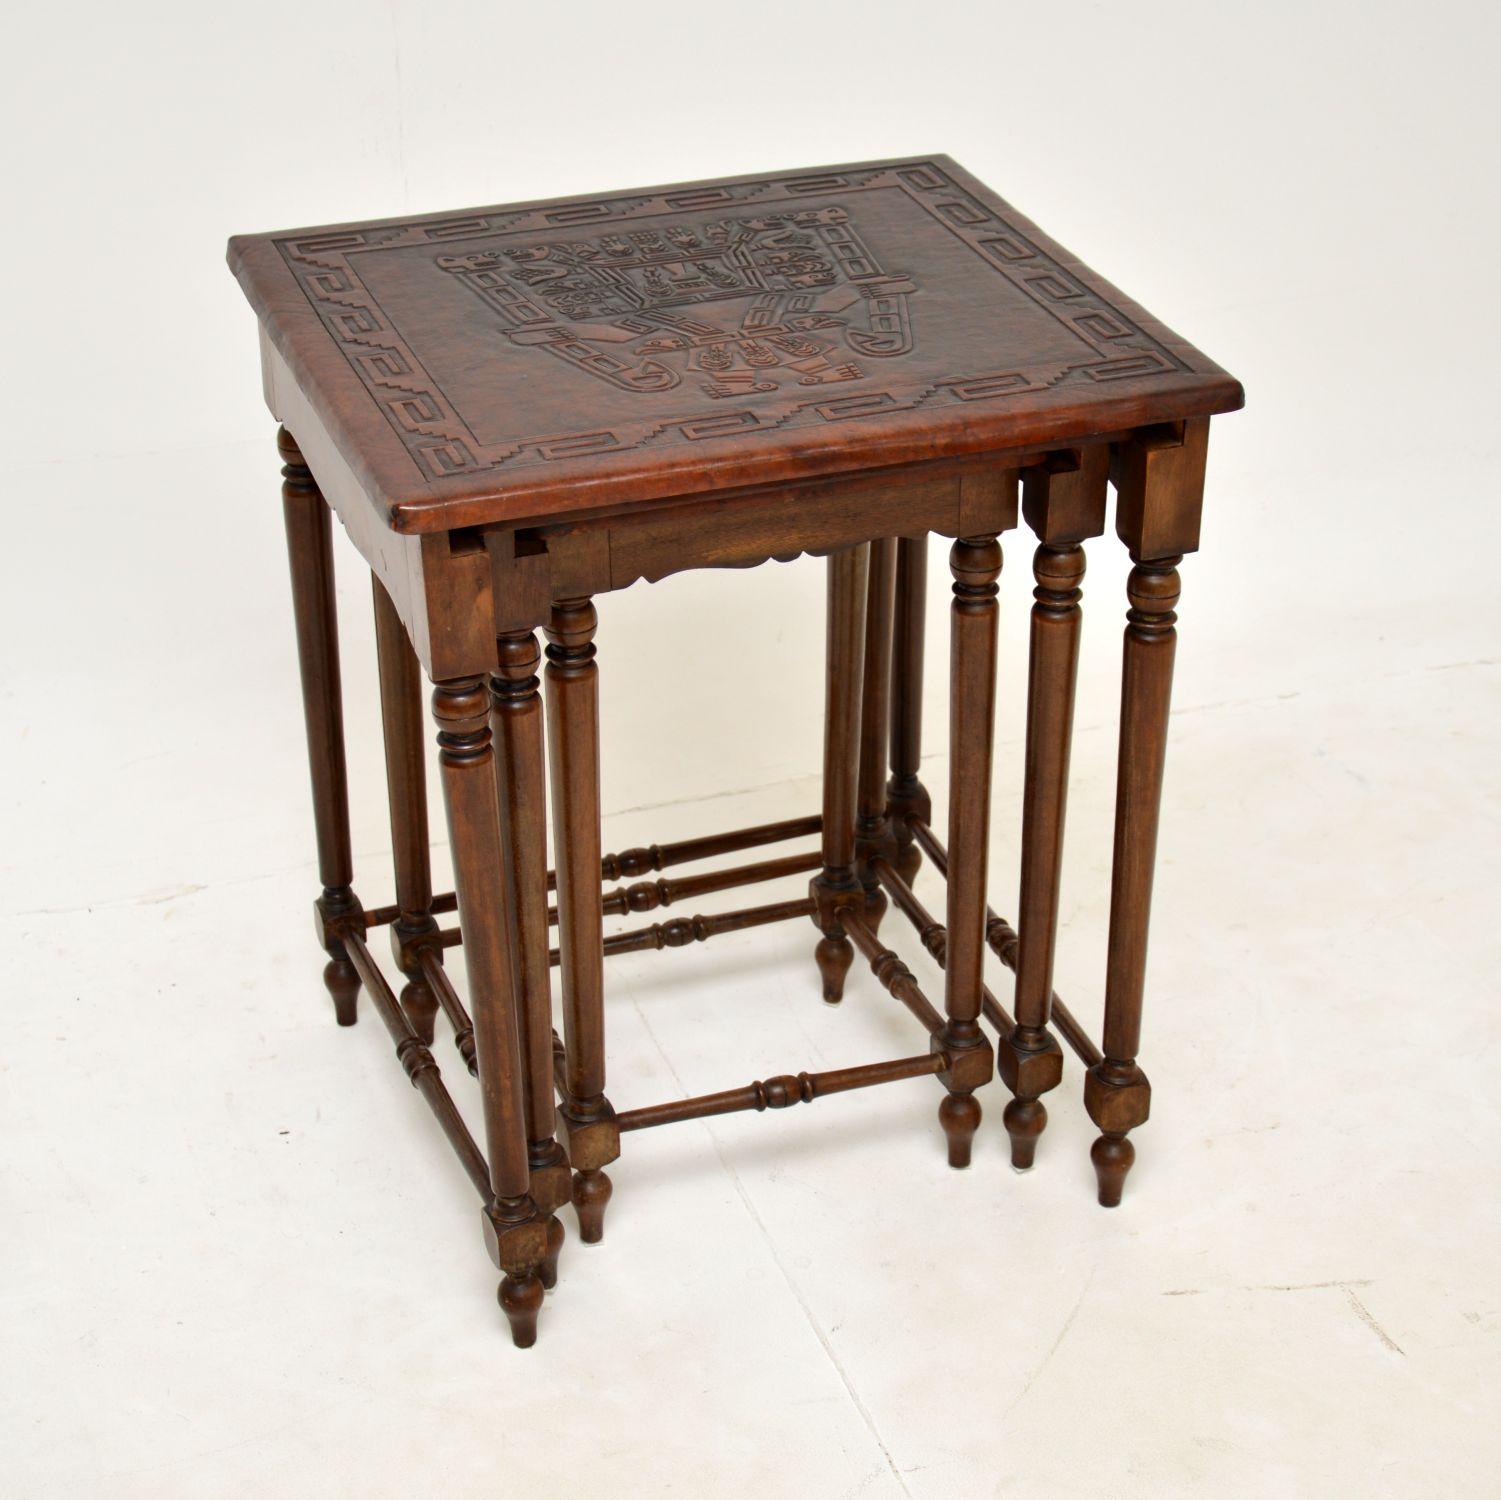 A very interesting nest of tables with embossed leather tops, which look like they were made in South or Central America. However, they could be English, with the tops in the style of.

The leather tops depict Aztec or possibly Inca gods, they have